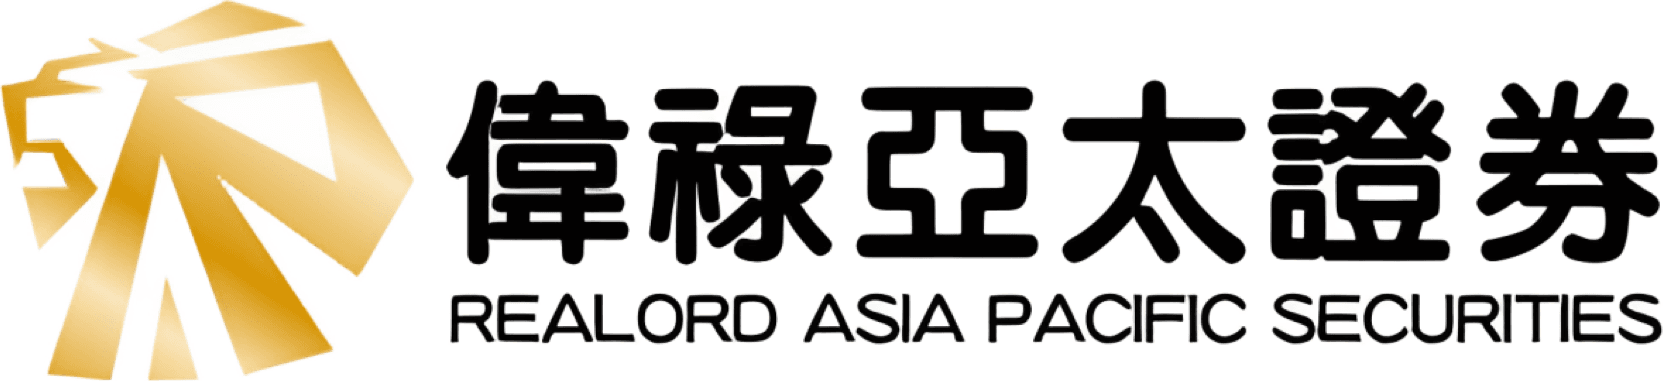 REALORD ASIA PACIFIC SECURITIES